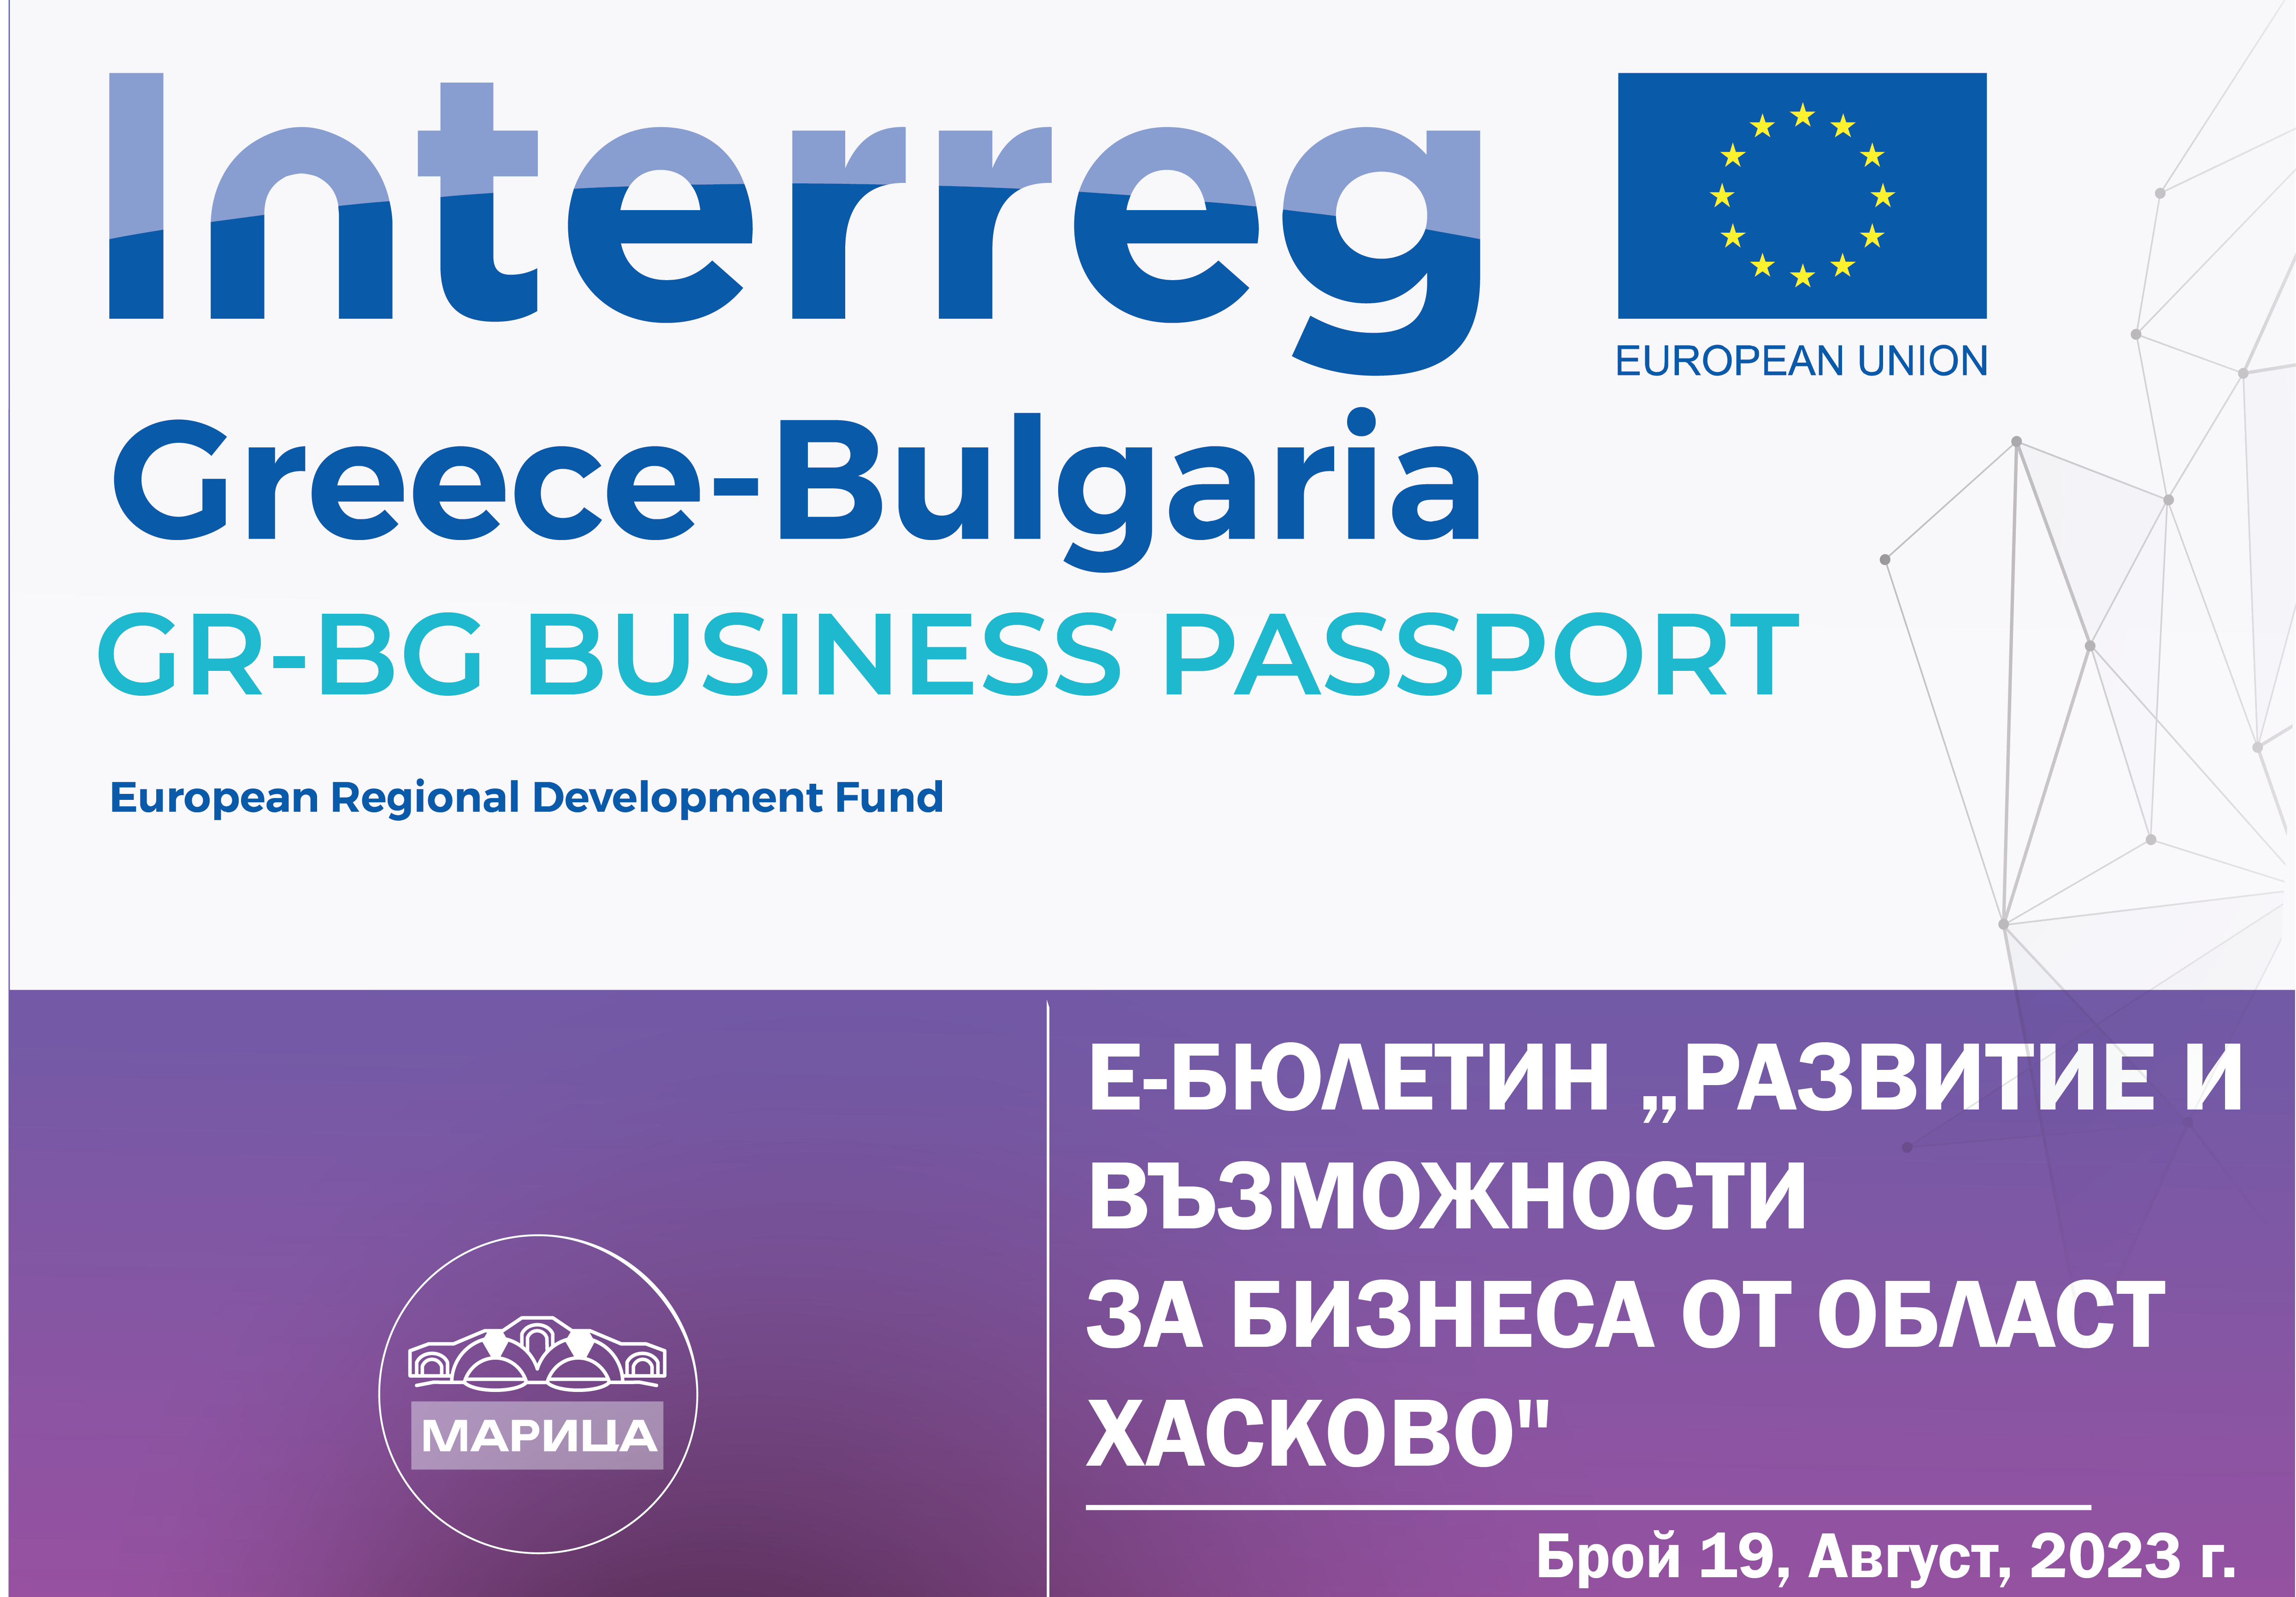 e-newsletter “Development and opportunities for business in the Haskovo region” under a project with the acronym “GR-BG BUSINESS PASSPORT, August, 2023, 19th edition